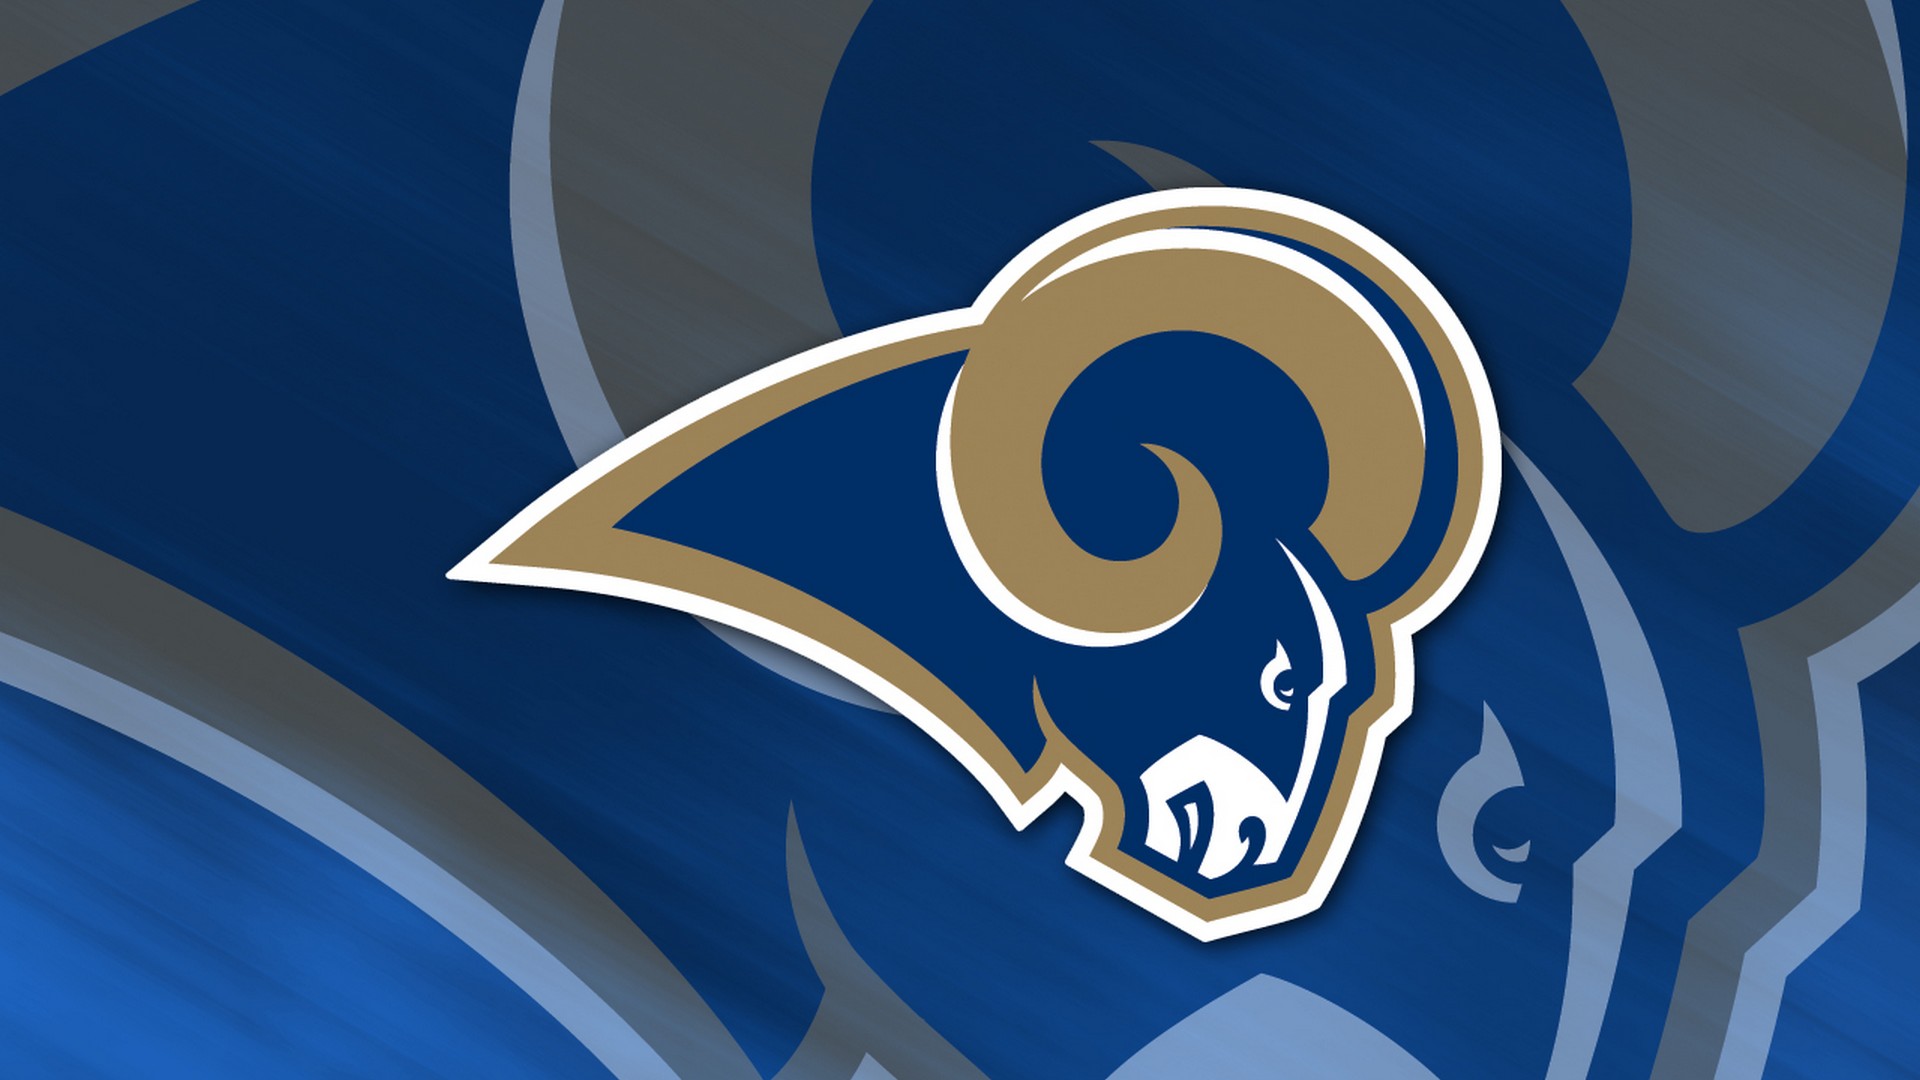 HD Los Angeles Rams Backgrounds With Resolution 1920X1080 pixel. You can make this wallpaper for your Mac or Windows Desktop Background, iPhone, Android or Tablet and another Smartphone device for free